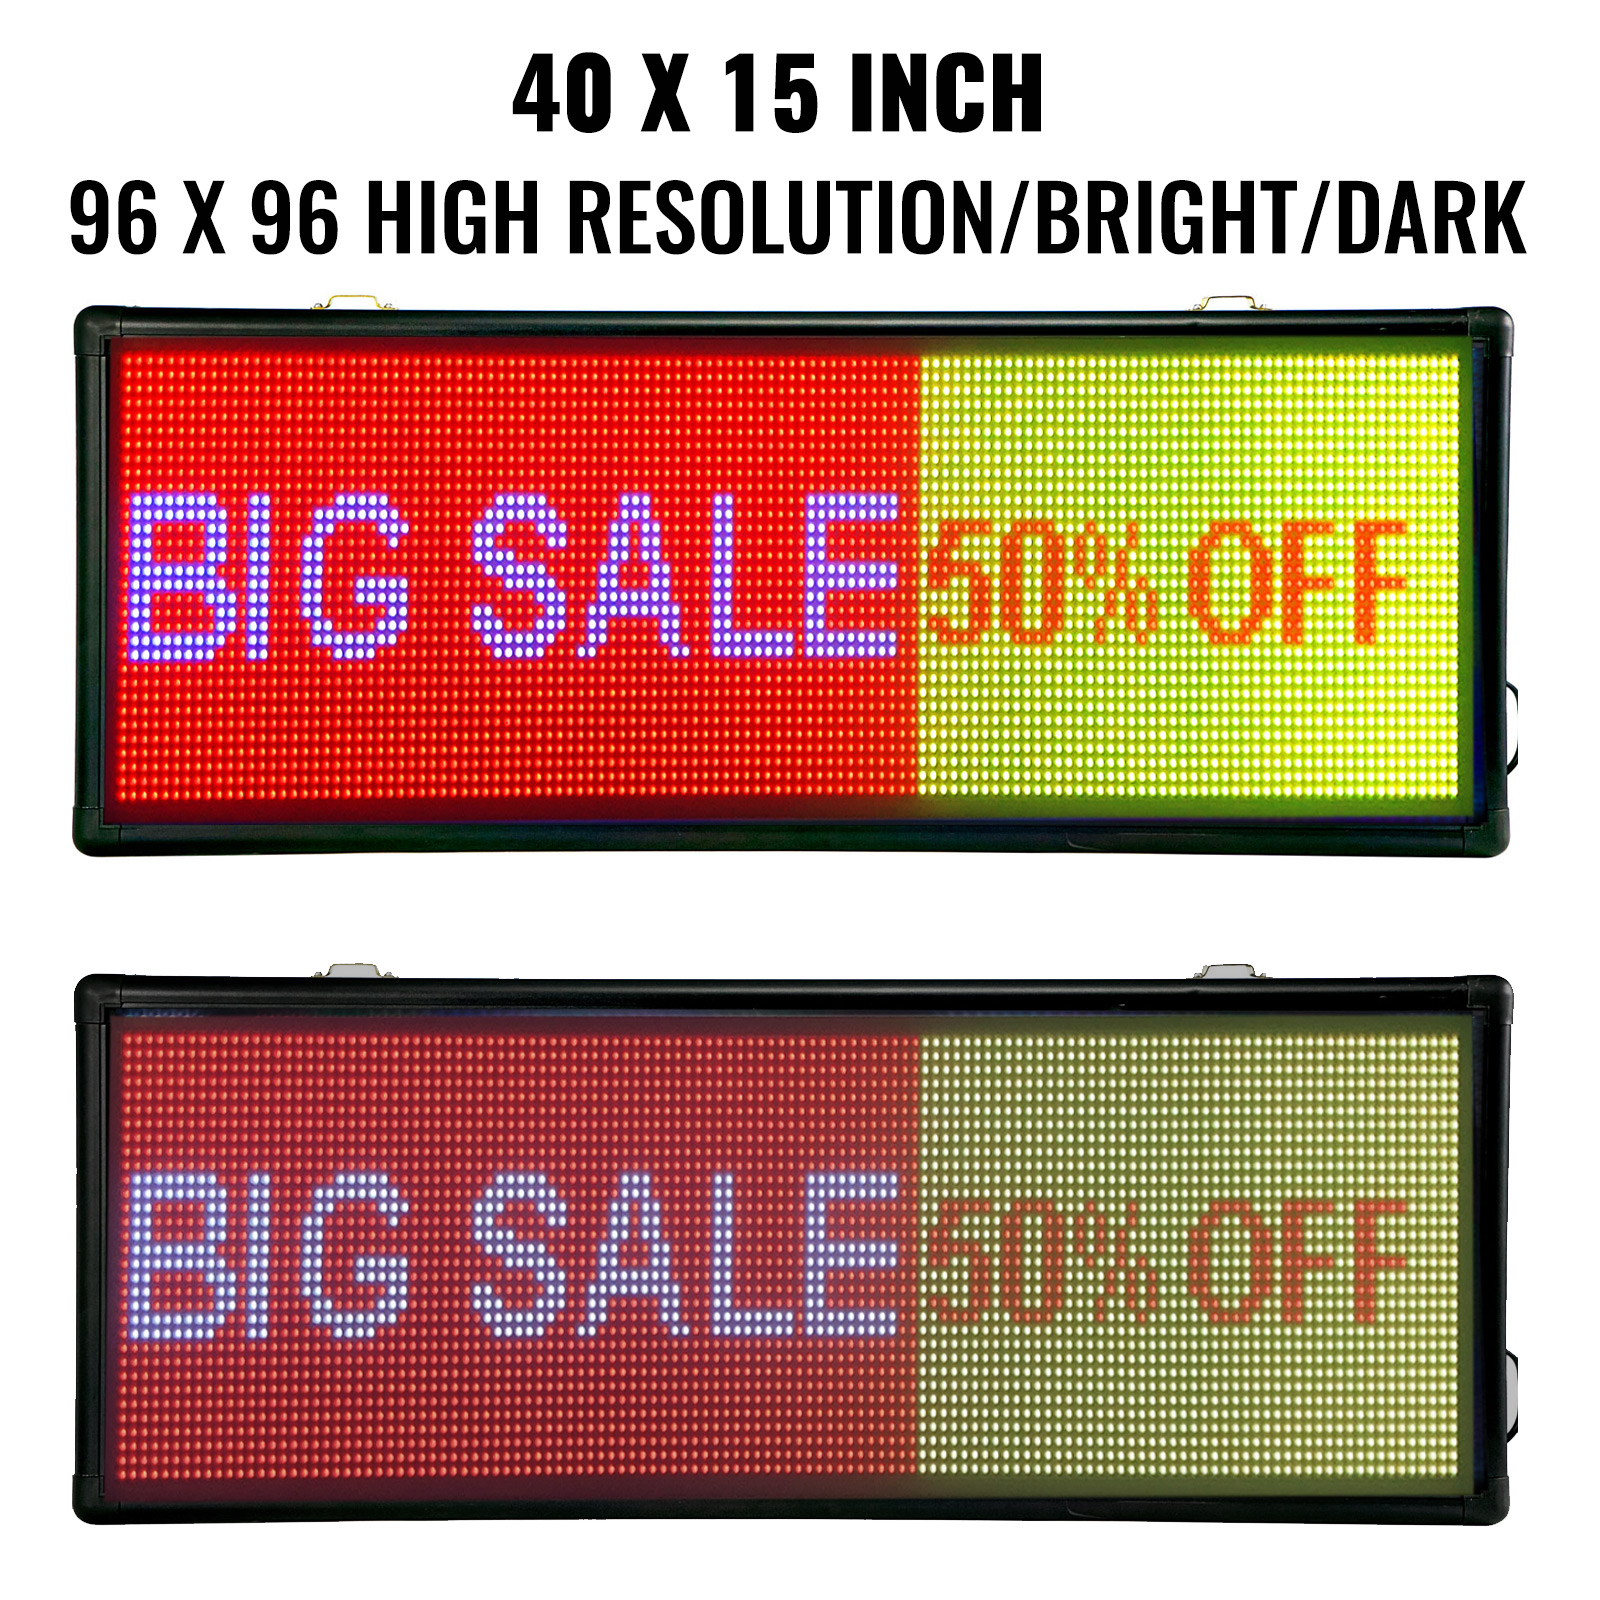 VEVOR Led Sign 40" x 15" Digital Sign Full Color Color Indoor with high  Resolution P10 Led Scrolling Display Programmable by PC  WiFi  USB for  Advertising